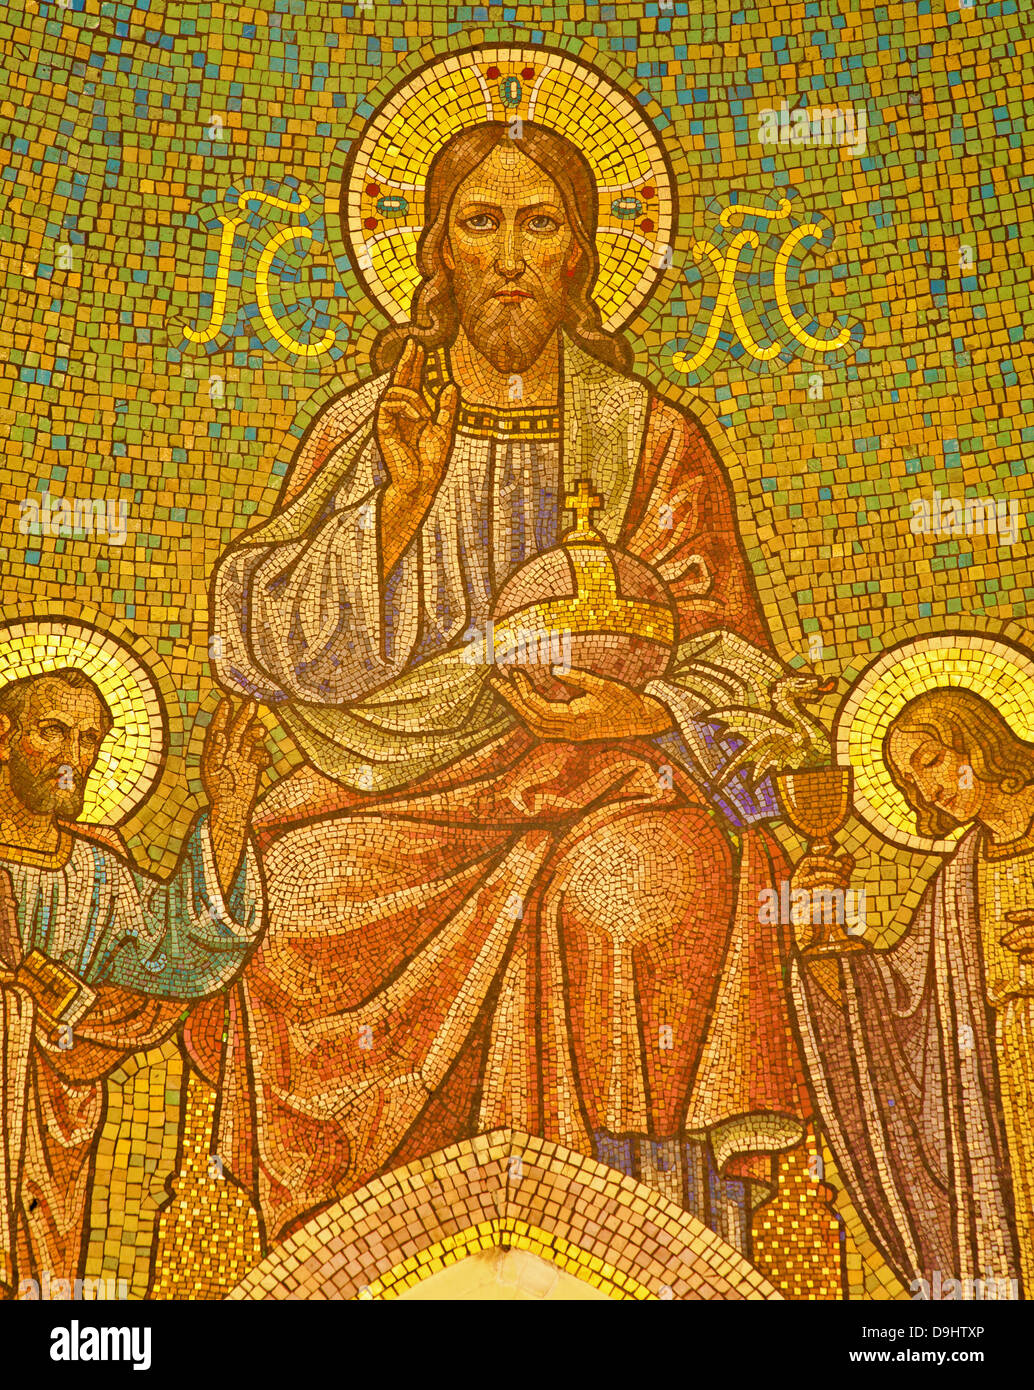 MADRID - MARCH 9: Mosaic of Jesus Christ and apostle Peter and John from main apse of Iglesia de San Manuel Stock Photo